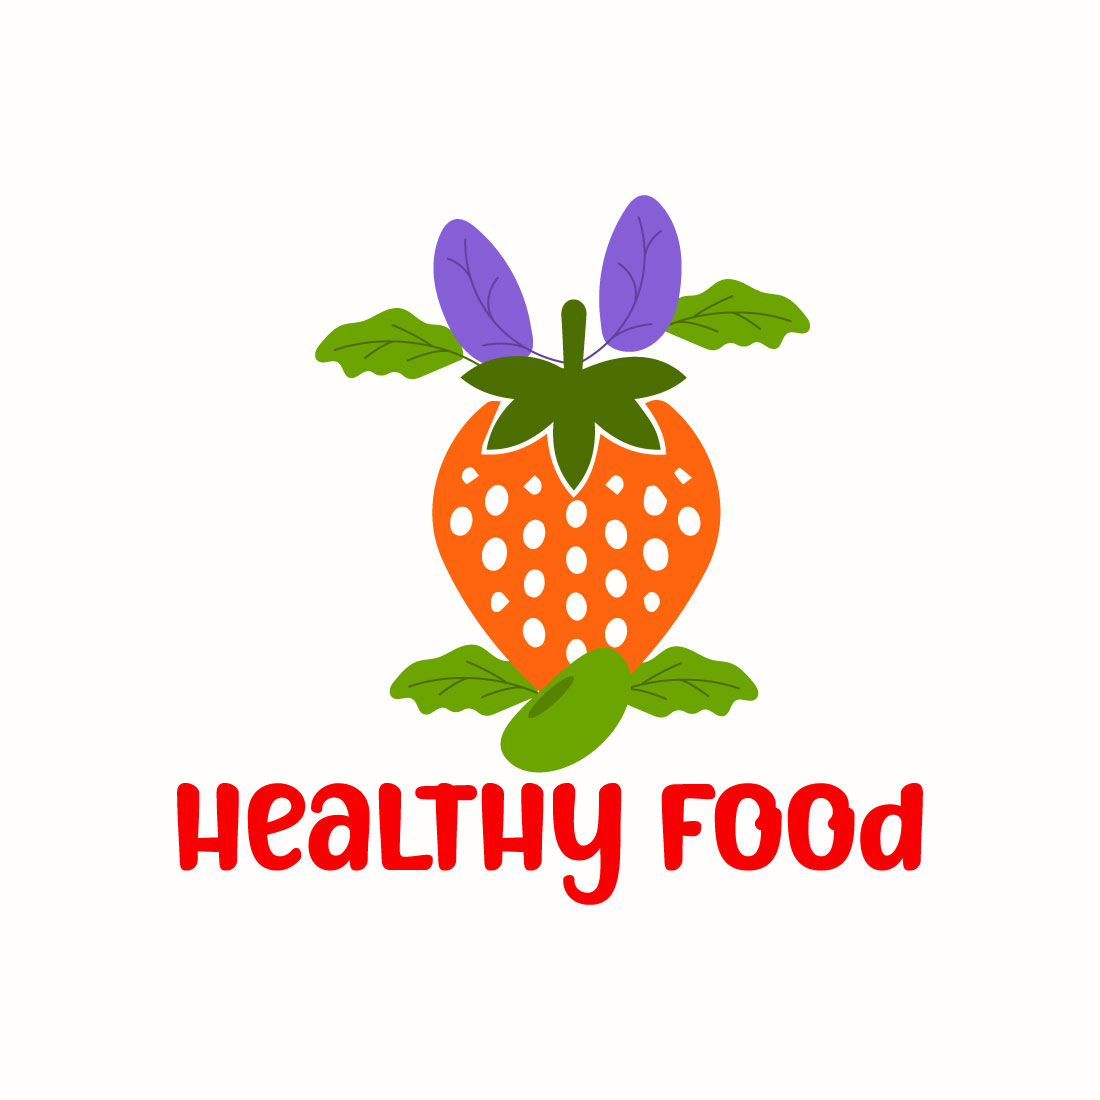 Free Healthy Living Made Simple preview image.